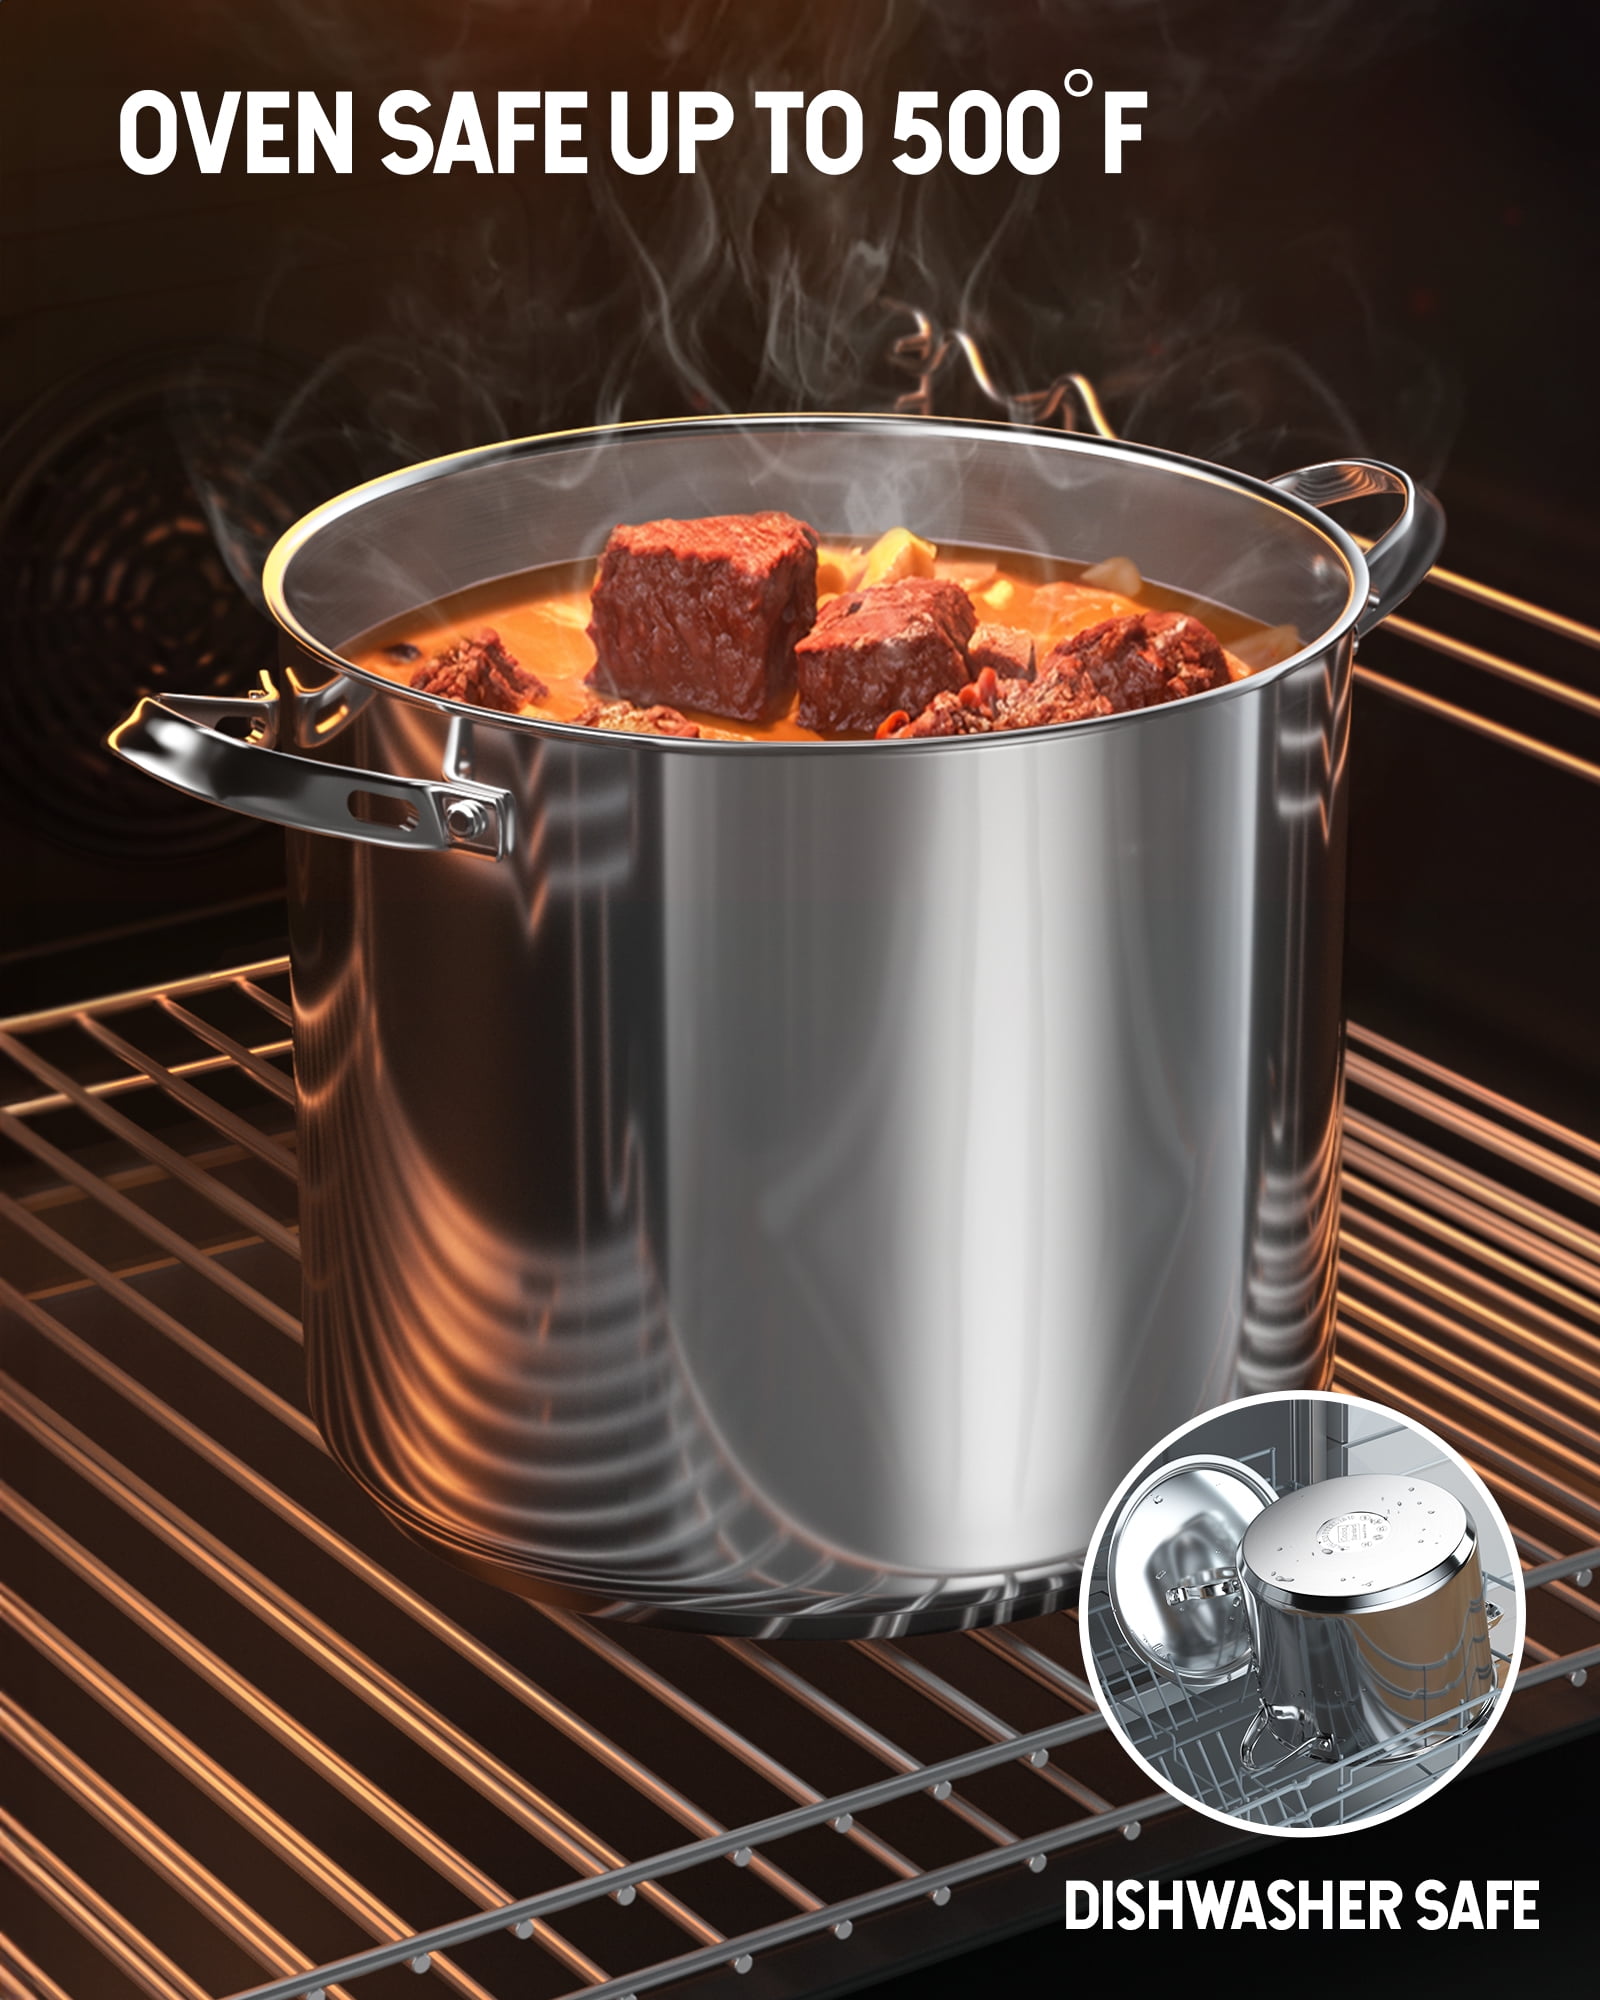 Mainstays 12-Qt Stainless Steel Stock Pot with Metal Lid - Walmart.com